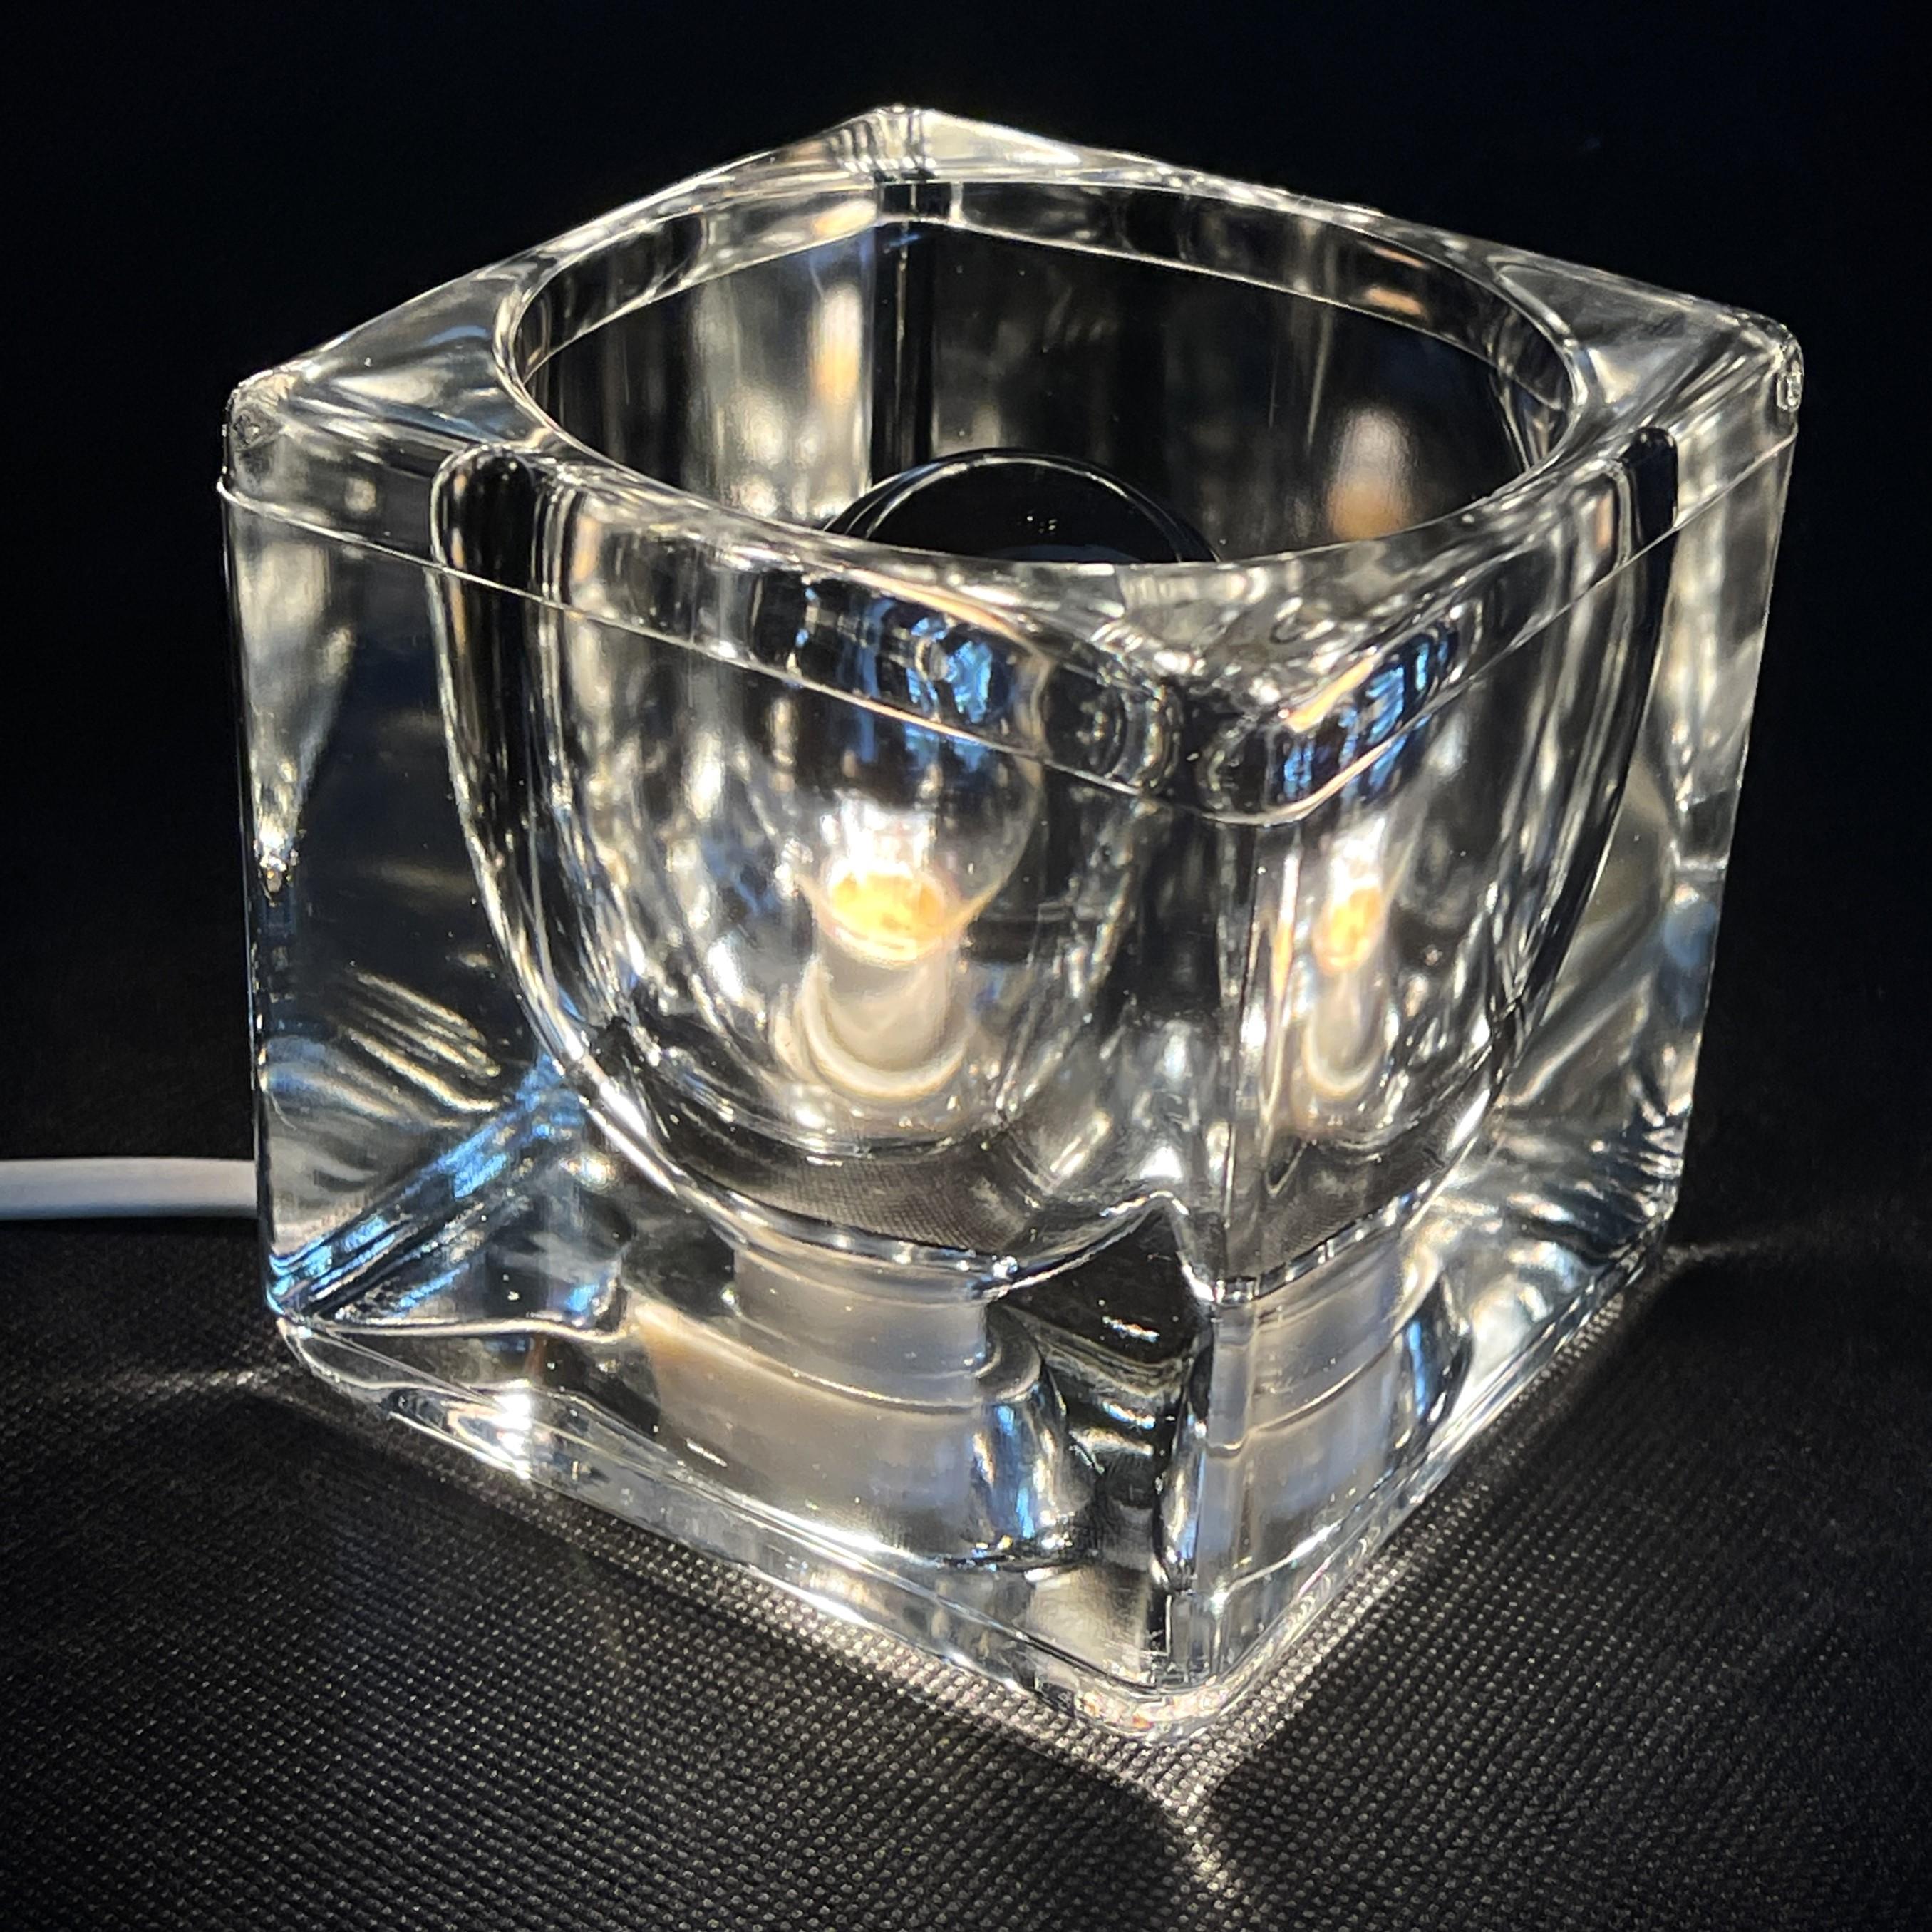 desk lamp ice glass by Peill & Putzler,  1970s.

The designer lamp is a real classic from the 70s. The lounge lamp from Peill & Putzler is made of high-quality glass in the shape of an ice cube. The clear glass cubes create a beautiful diffusion of